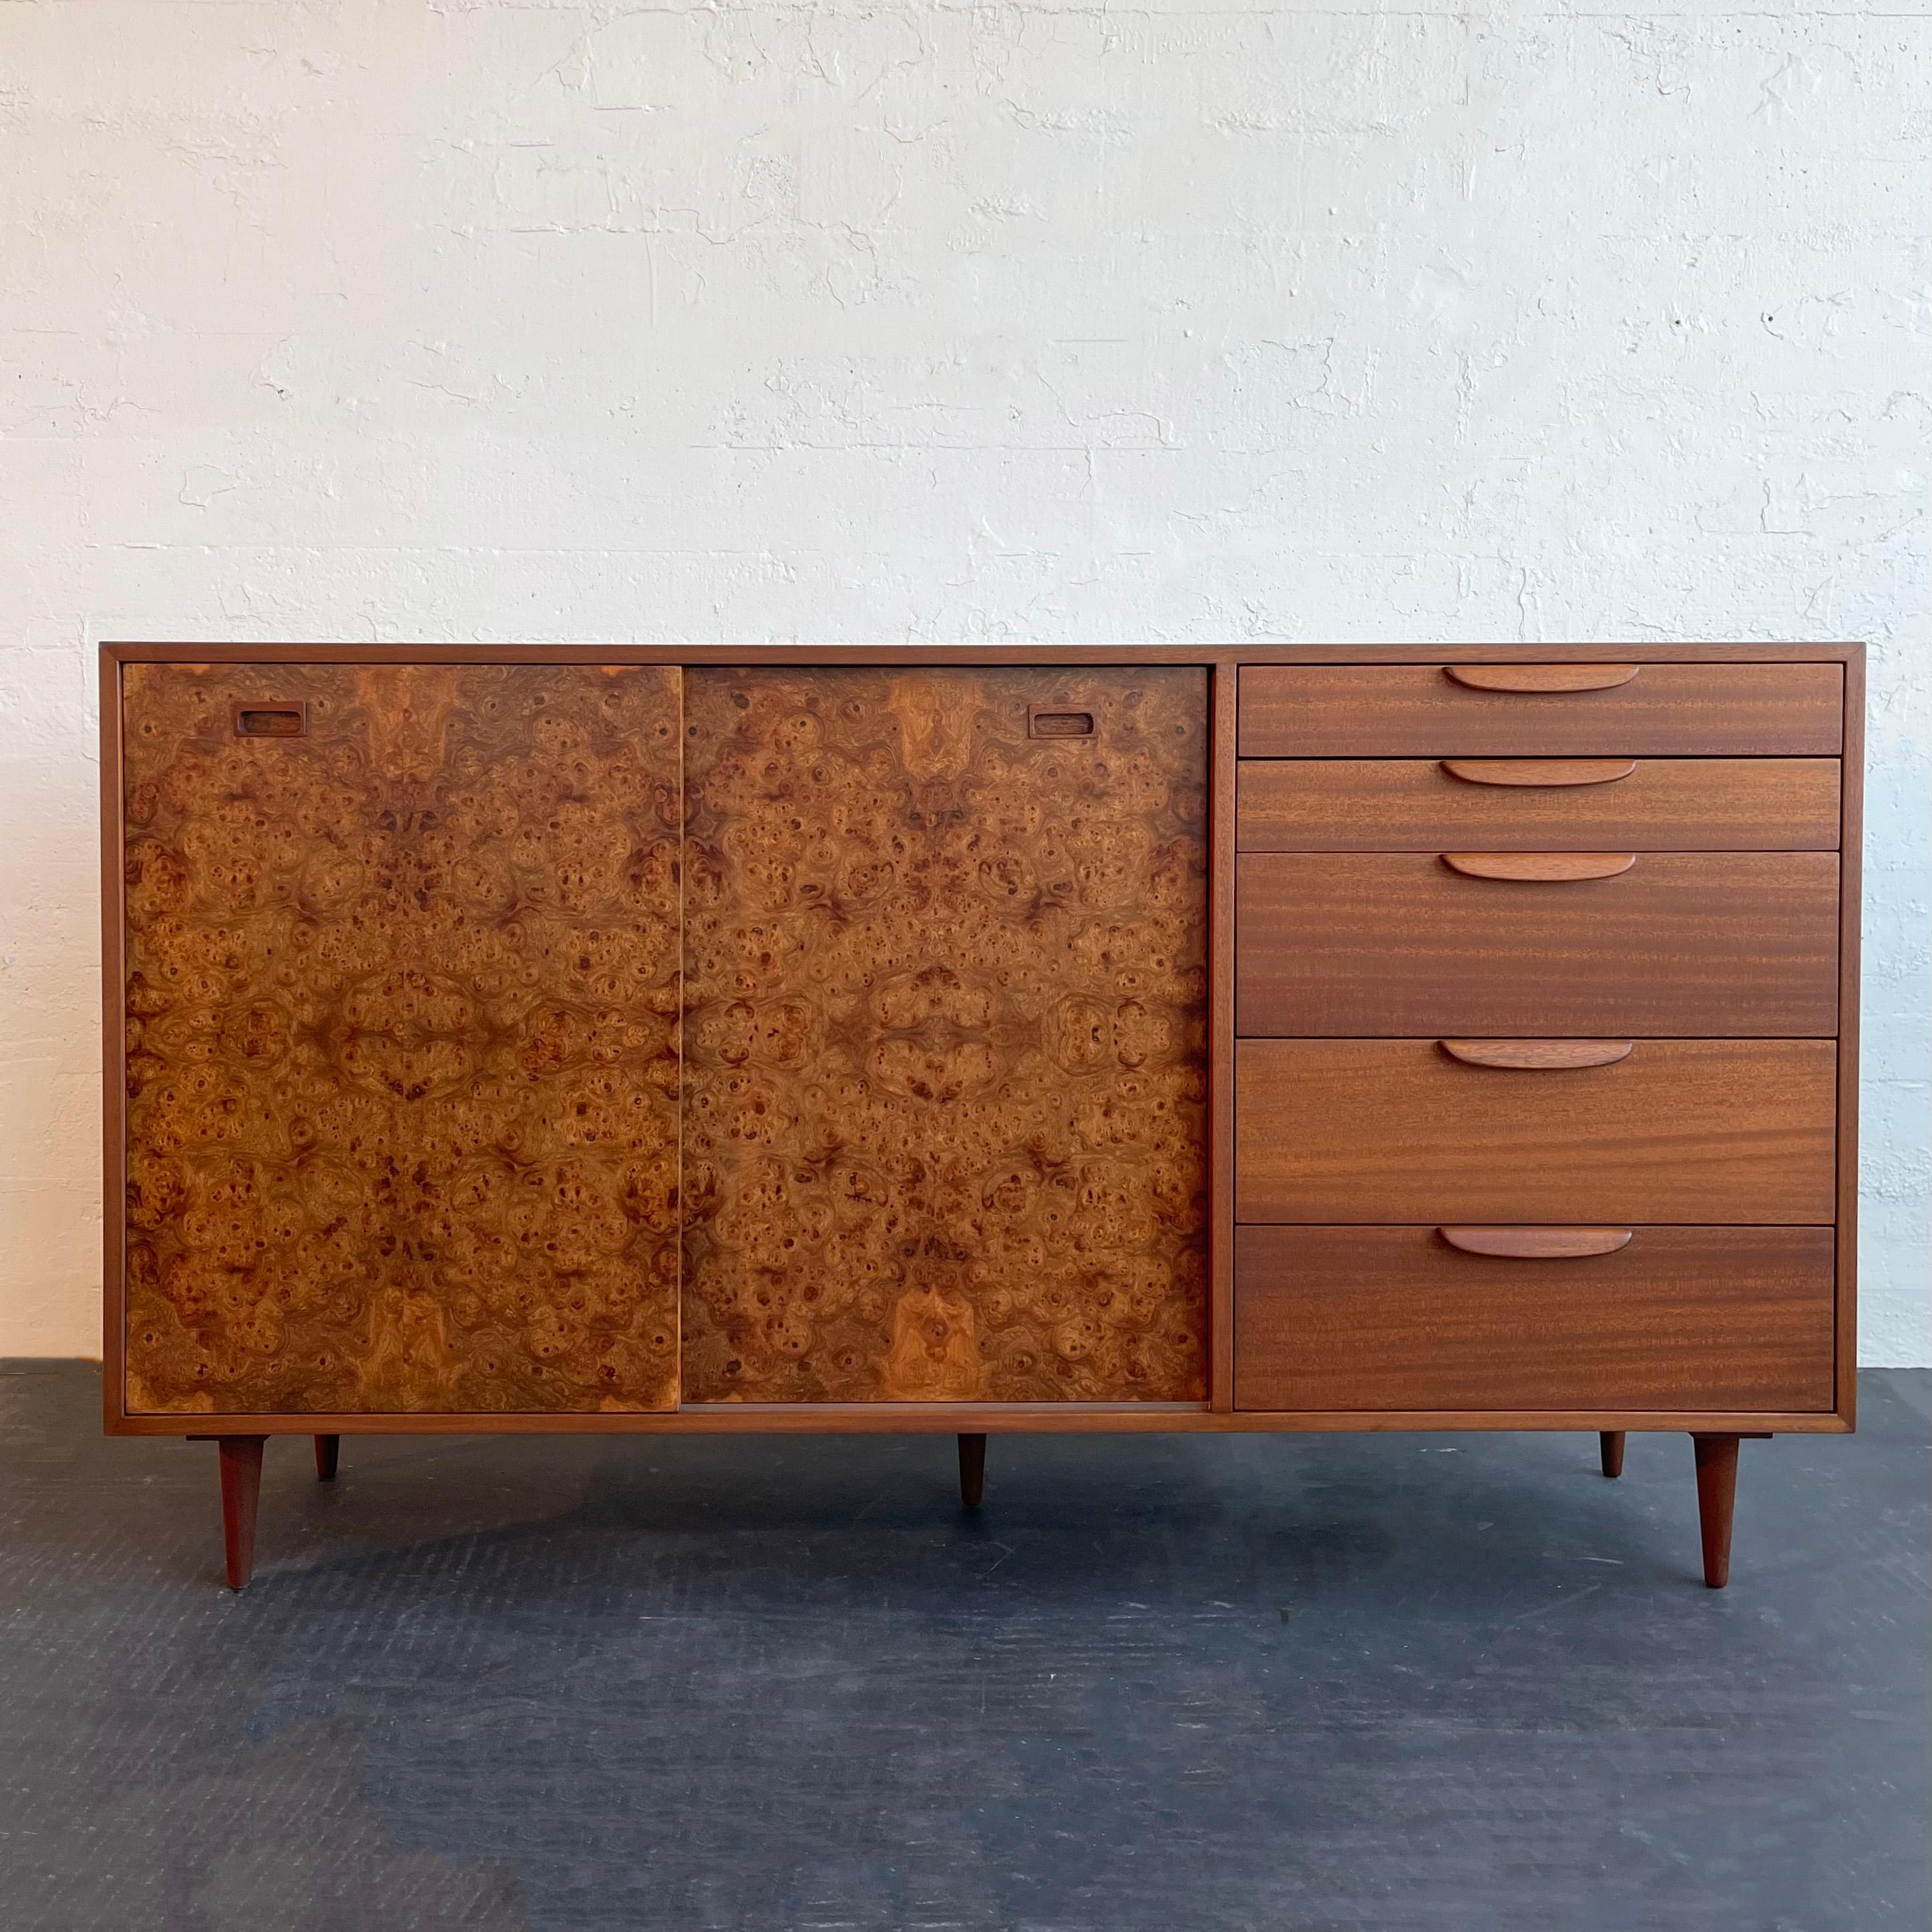 Mid-century modern, sideboard / credenza / dresser by Harvey Probber features a mahogany case and drawers with diamond-matched, walnut burl sliding doors. The interior features white lacquered pull-out drawers and shelves. This gorgeous case piece